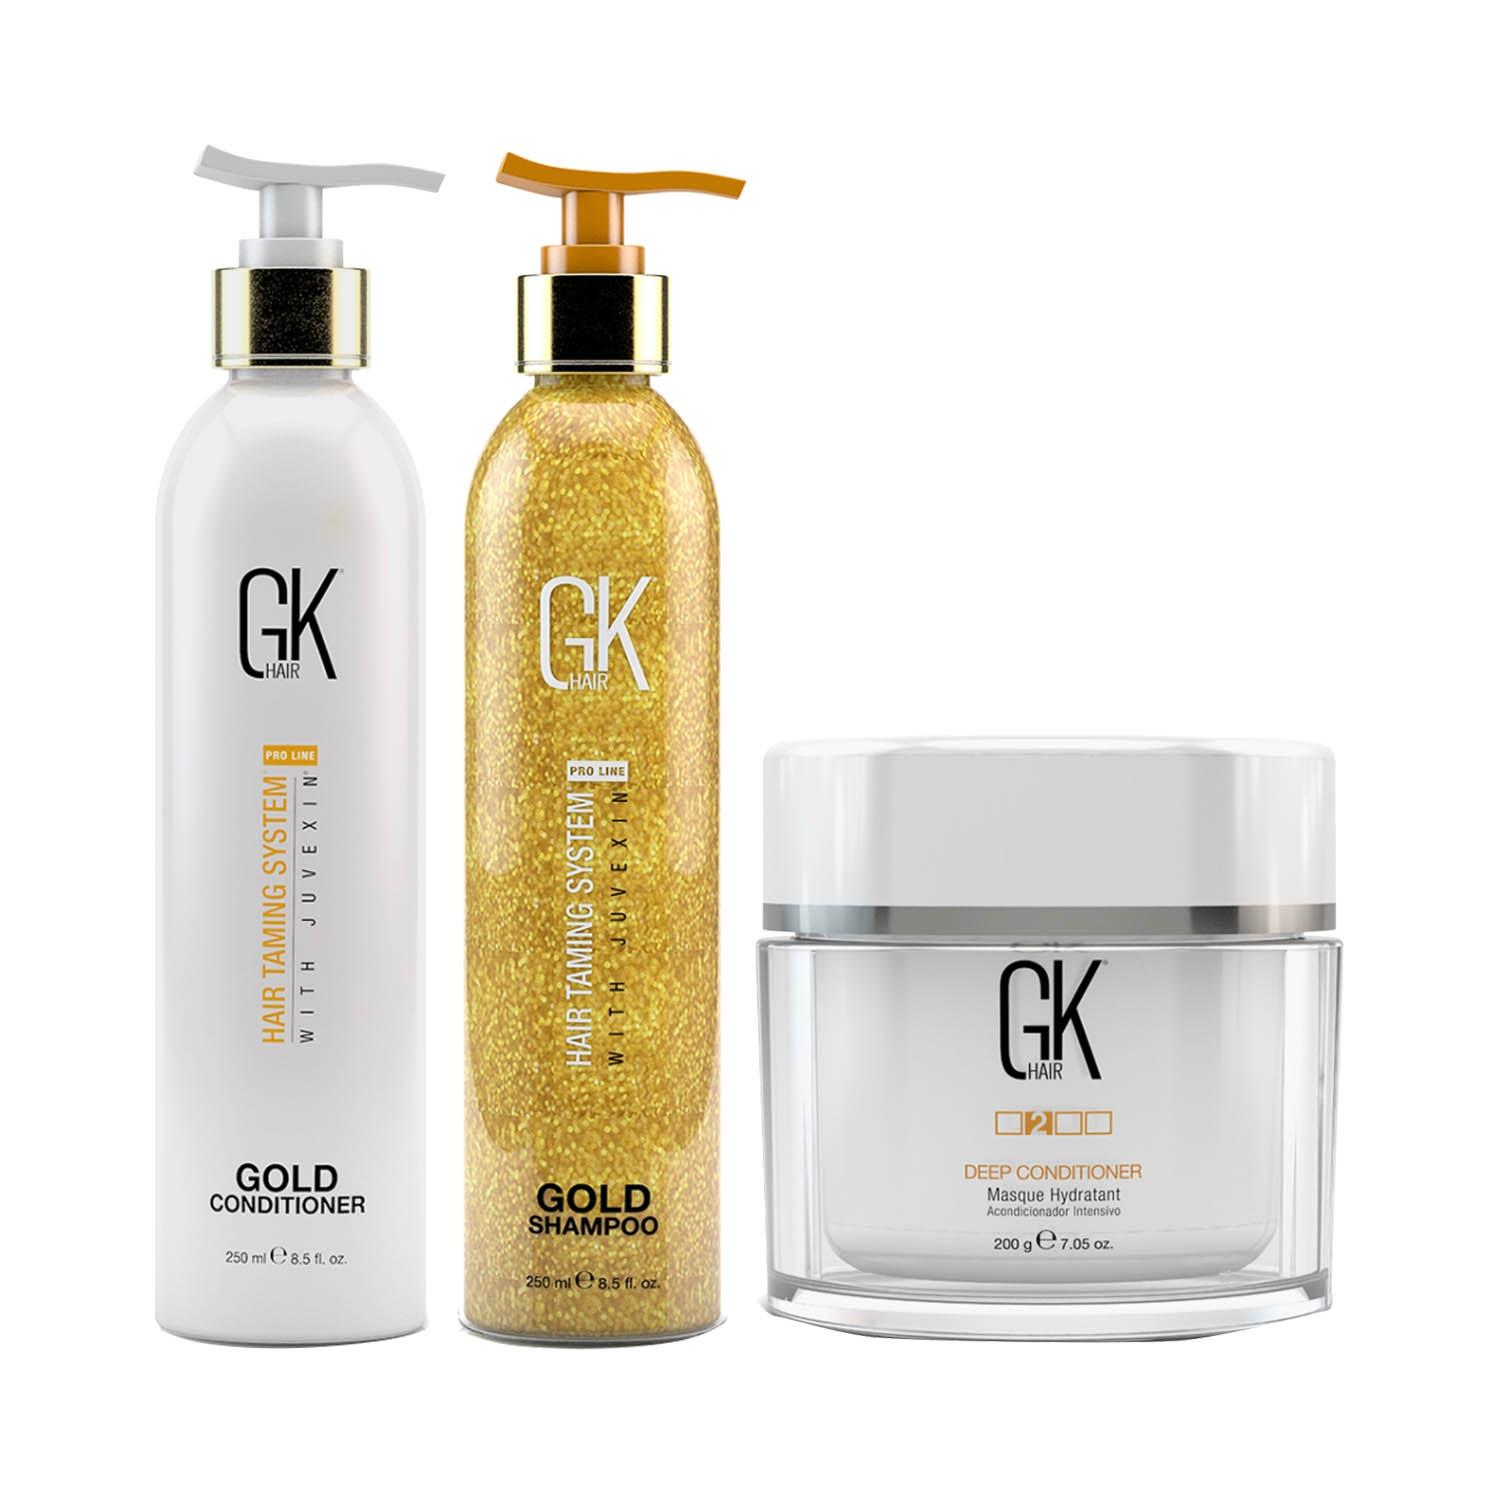 GK Hair Gold Shampoo and Conditioner 250ml with Deep Conditioner Masque 200gm